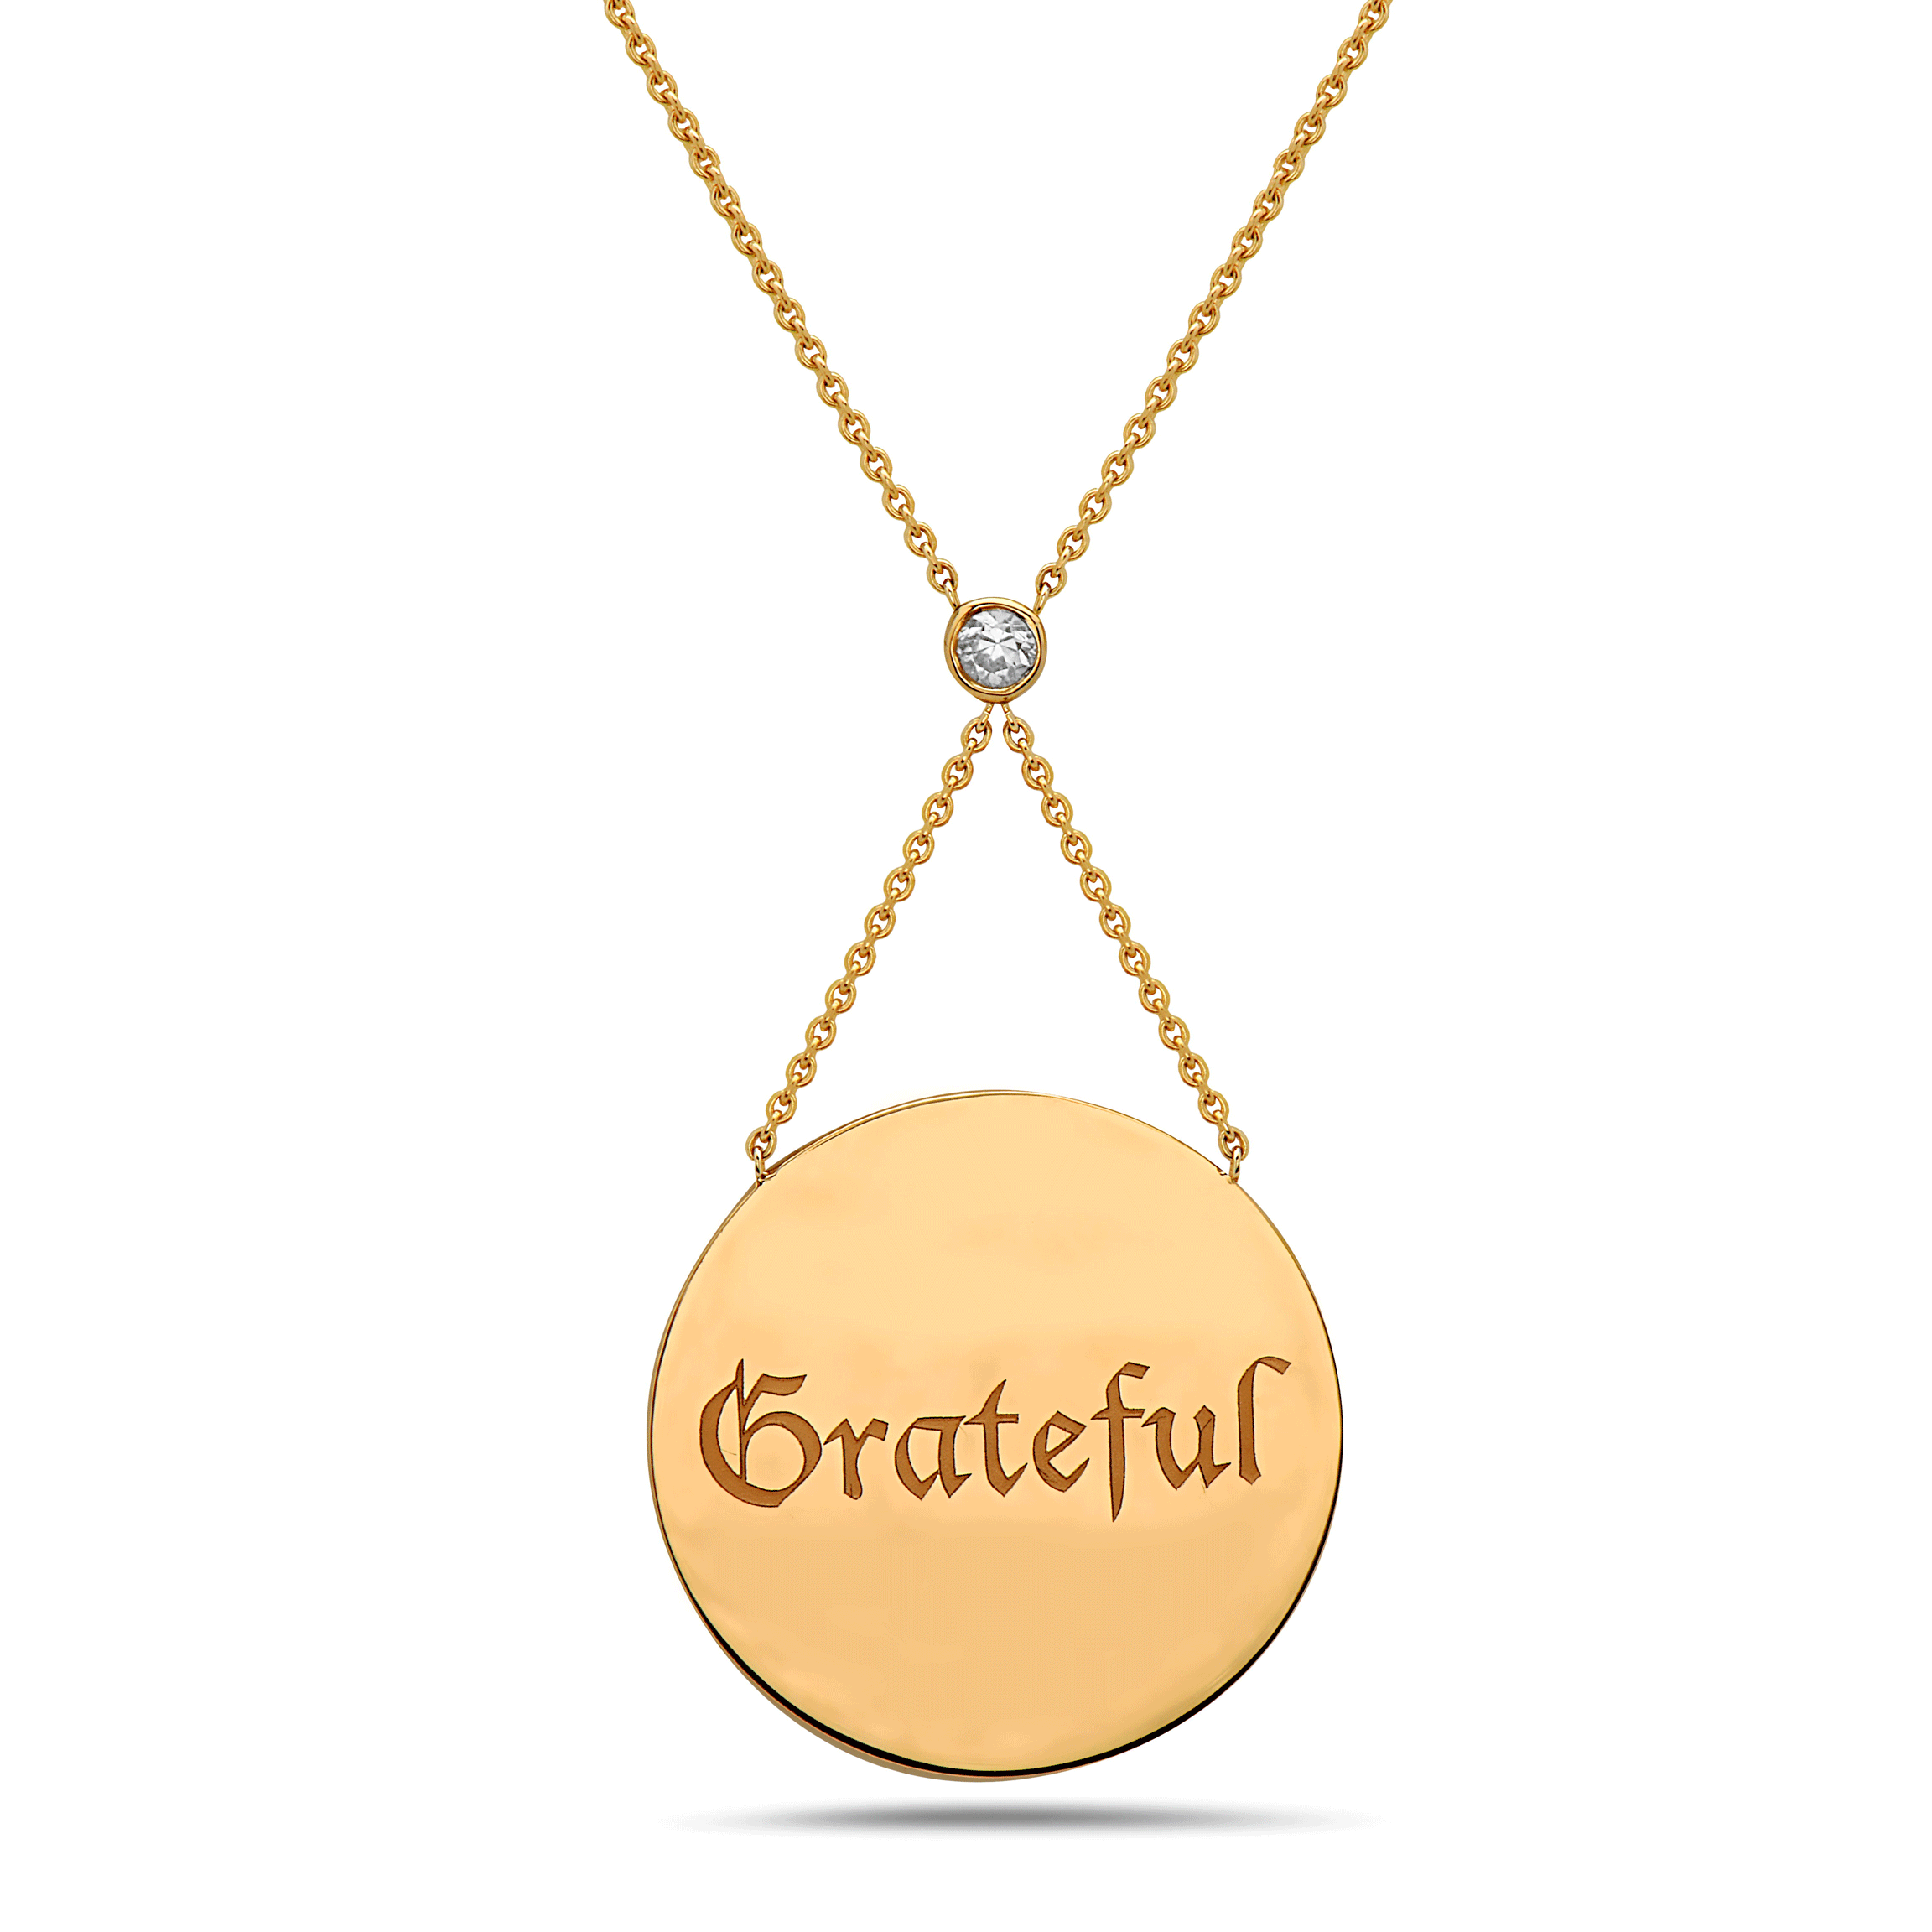 14K gold,GRATEFUL, expression necklace, inspire someone or keep a meaning close to your heart, 18" gold chain with white diamond, available to custom design your unique expression